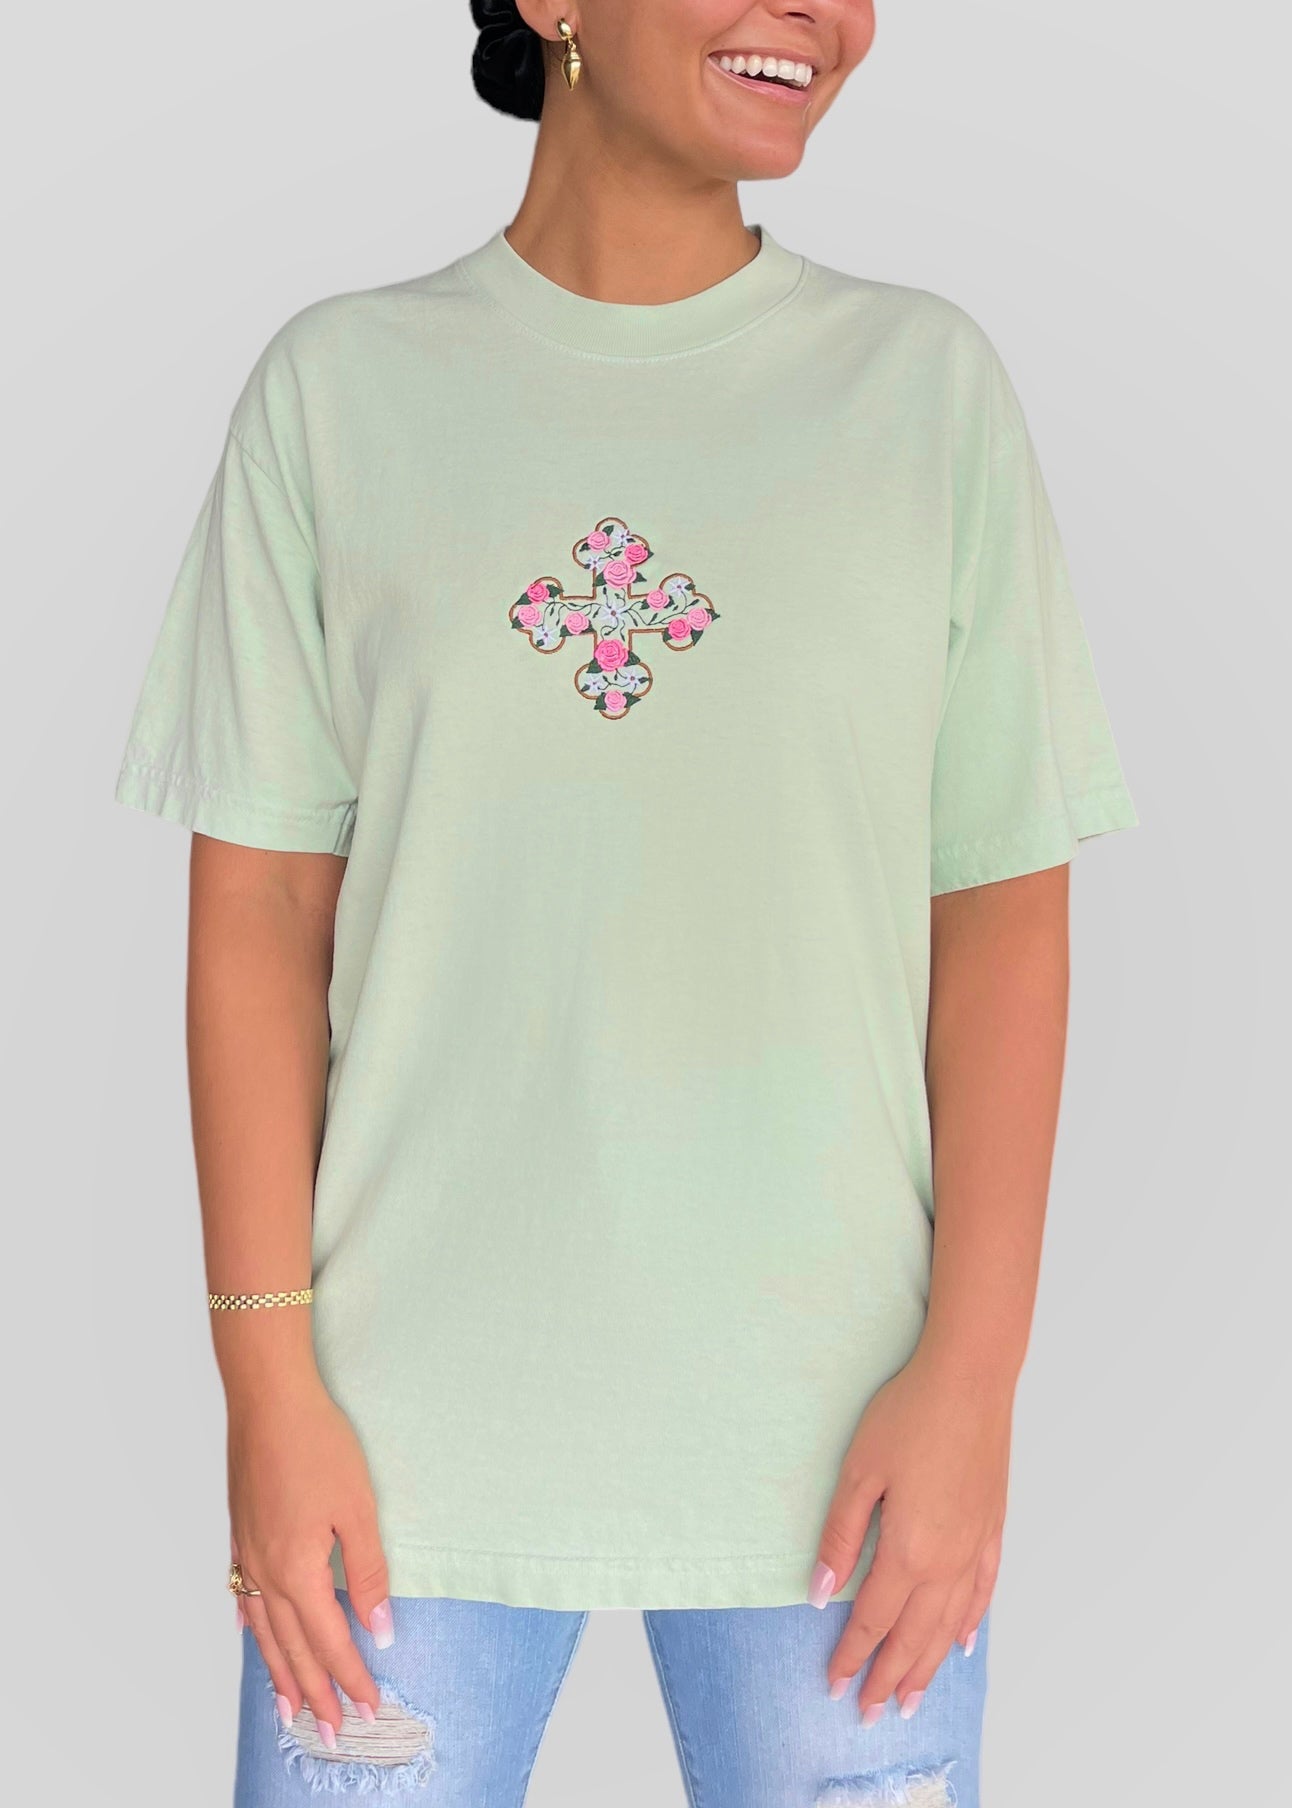 Premium Embroidered Floral Coptic Cross T-Shirts